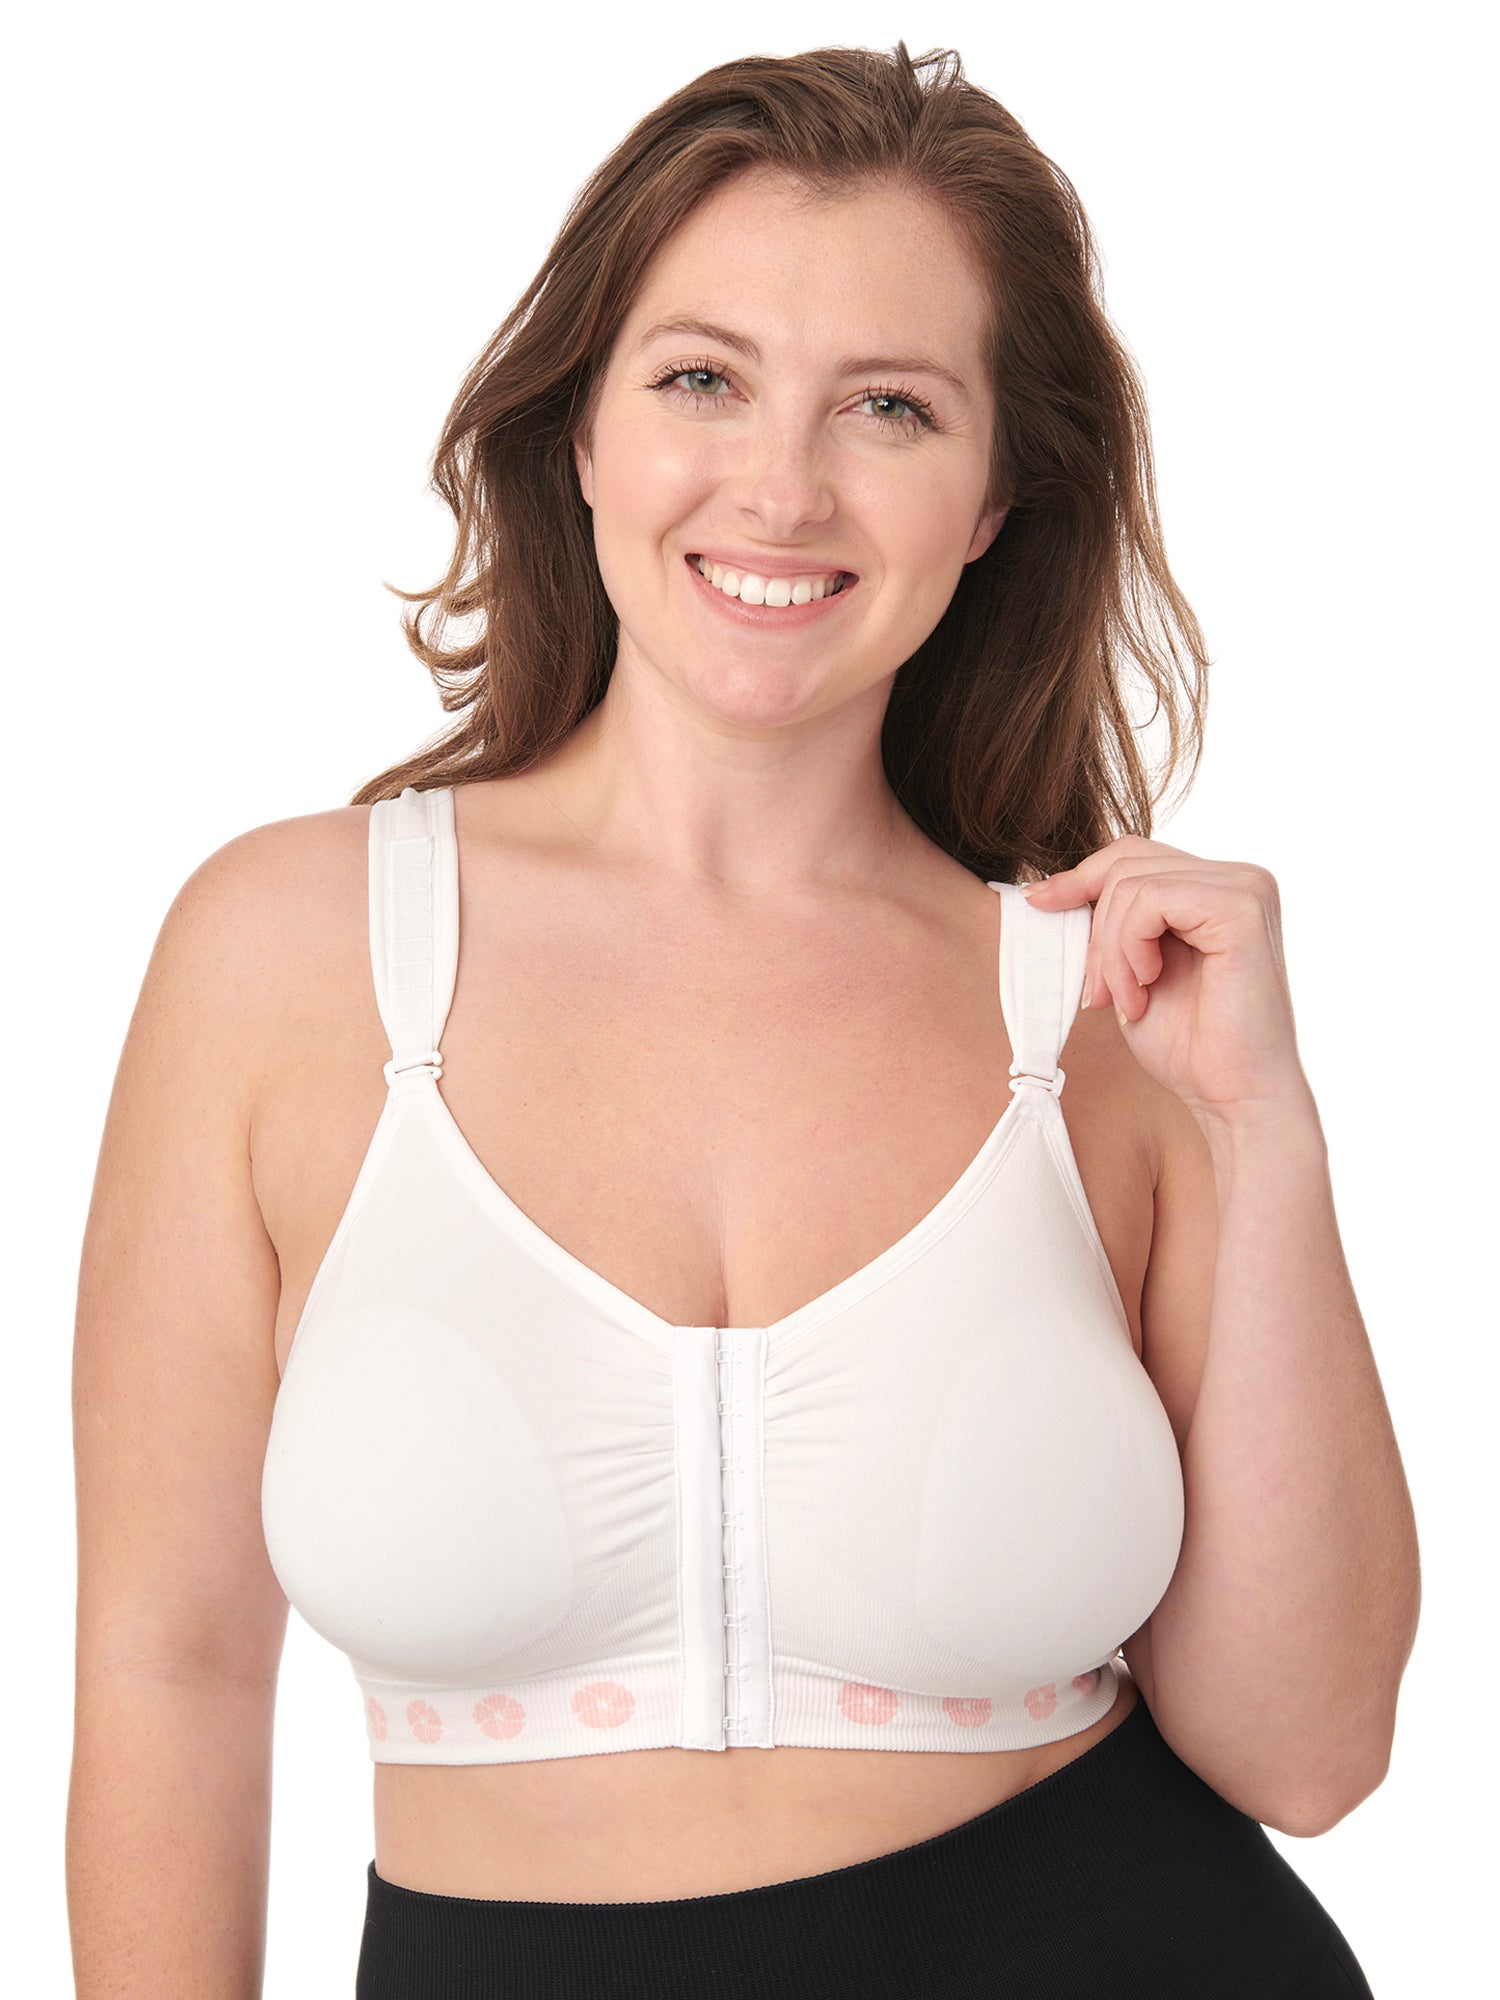 Curad Post-Surgical Compression Bra, Size L - Curad CURMAMCOMP3 EA - Betty  Mills